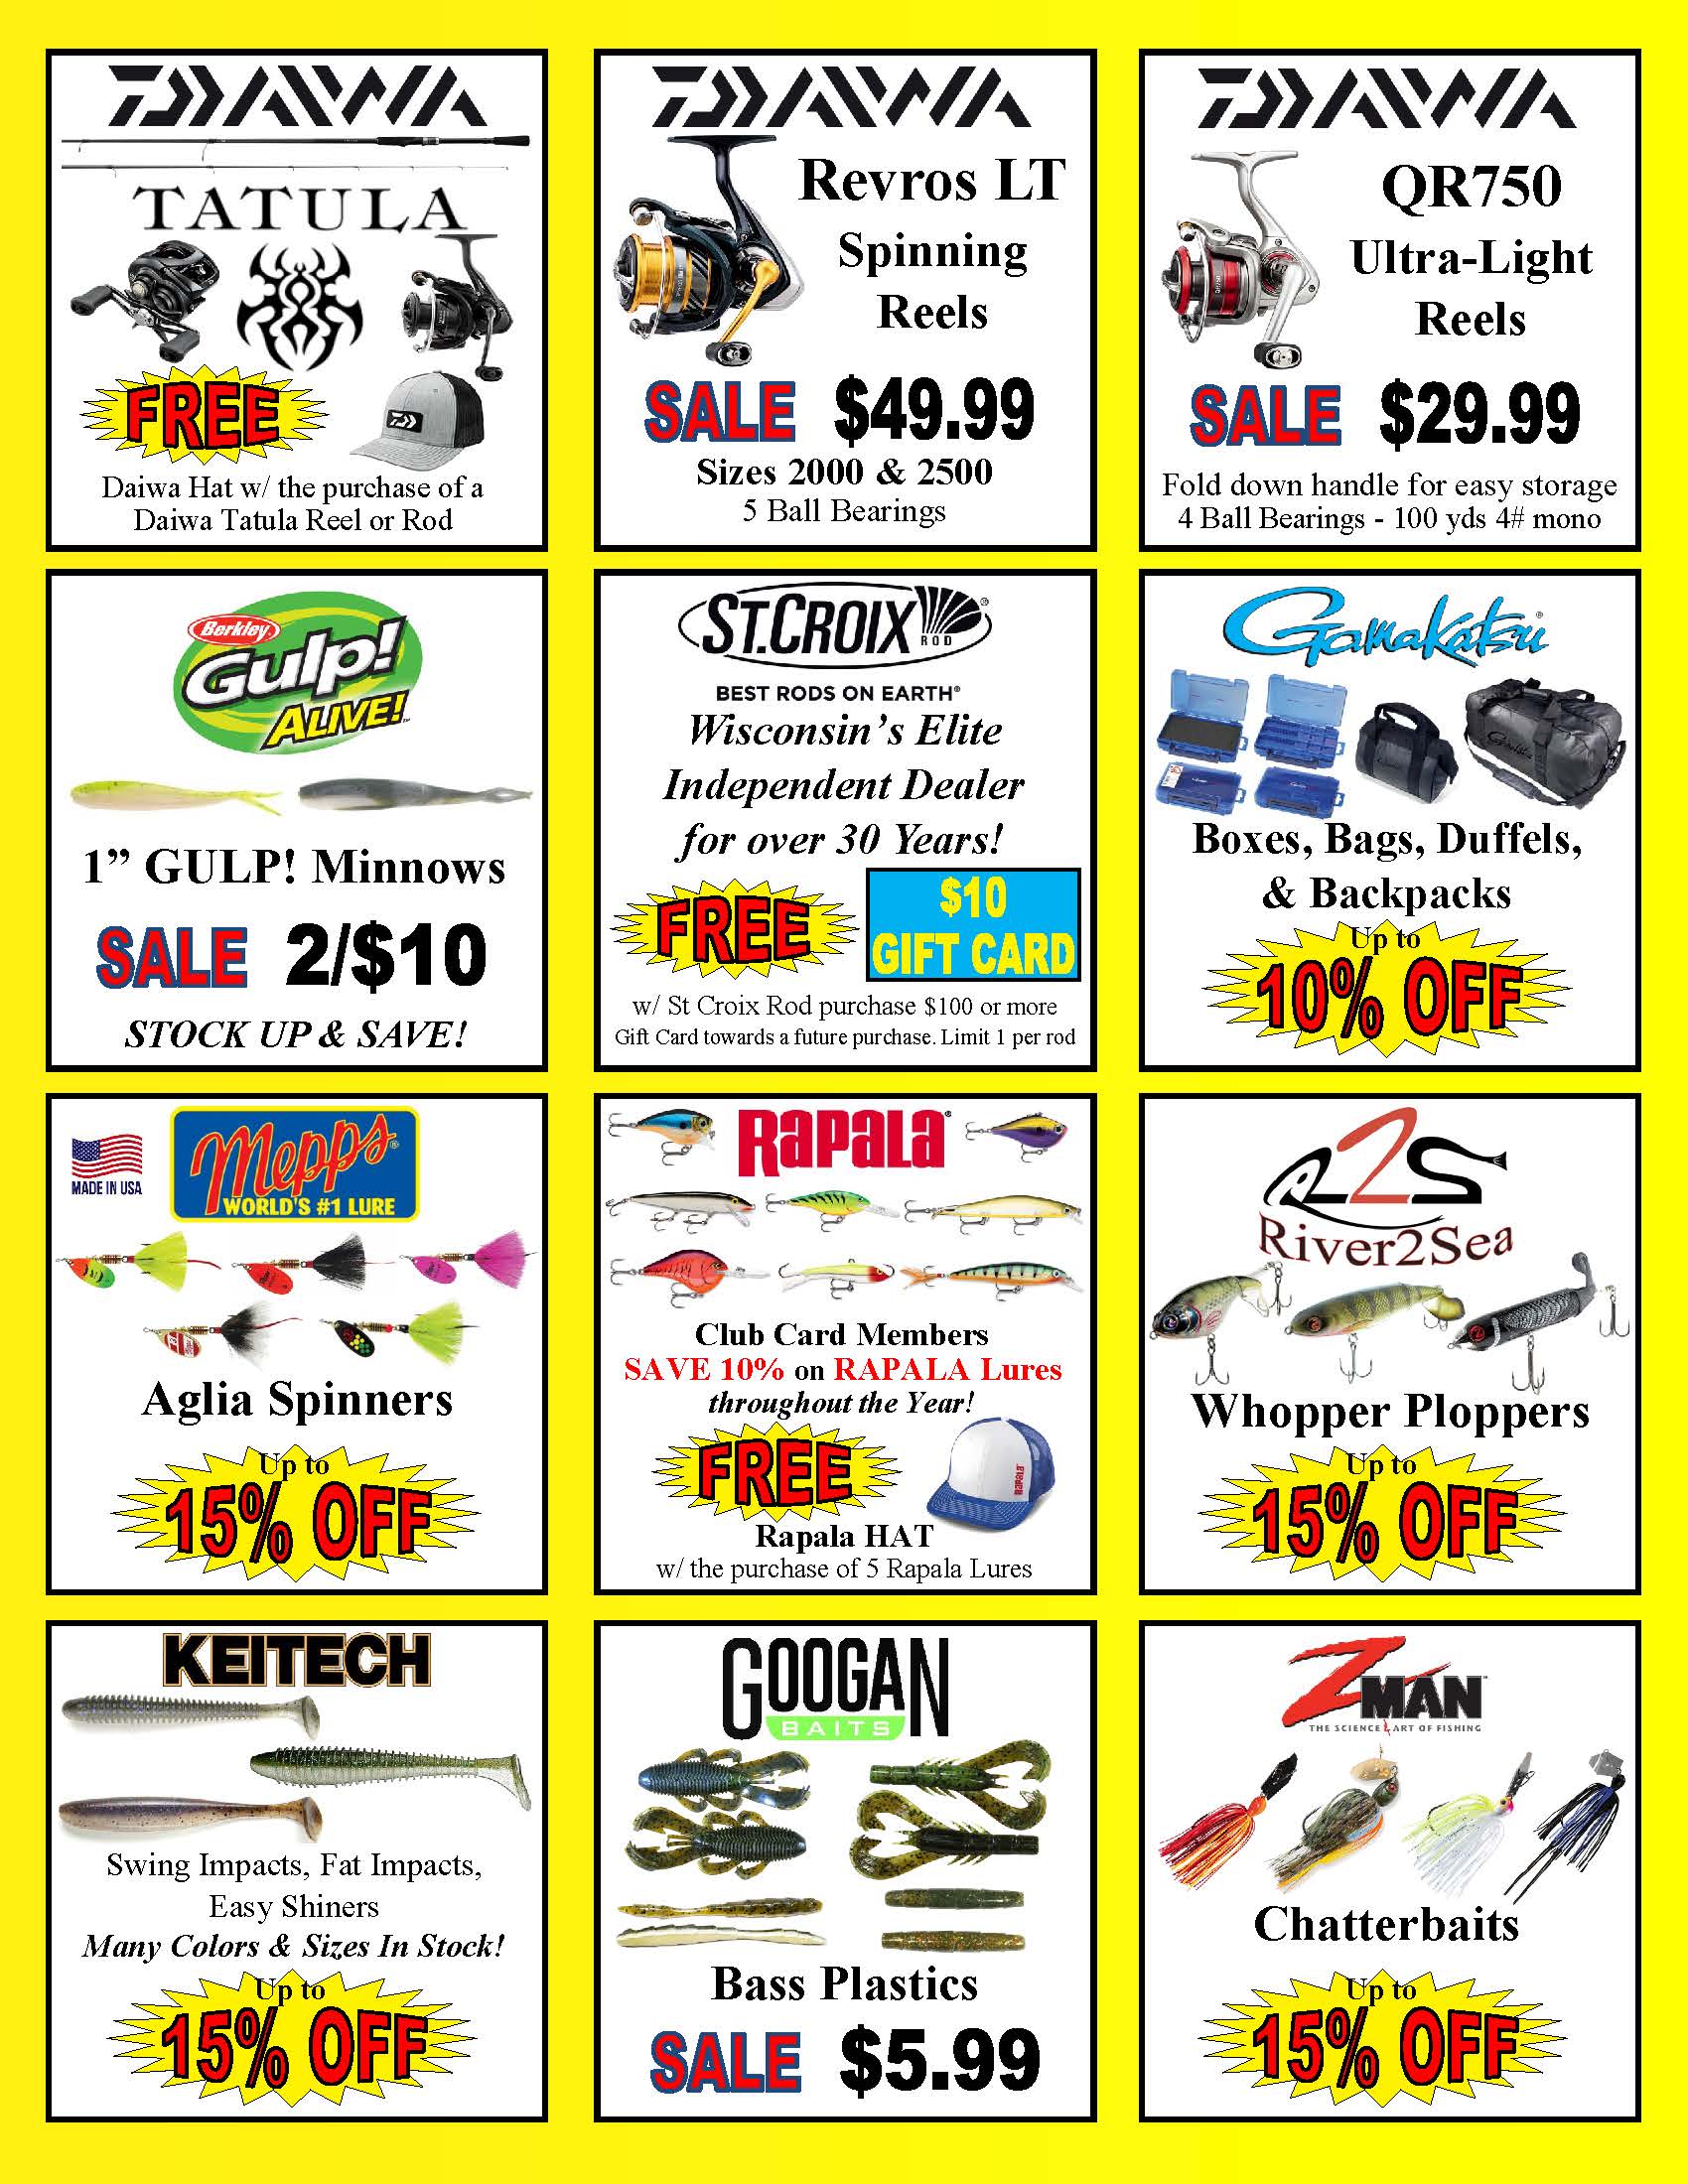 Anniversary Flyer 40 W NEW COVER_Page_7 - Dick Smith's Live Bait & Tackle